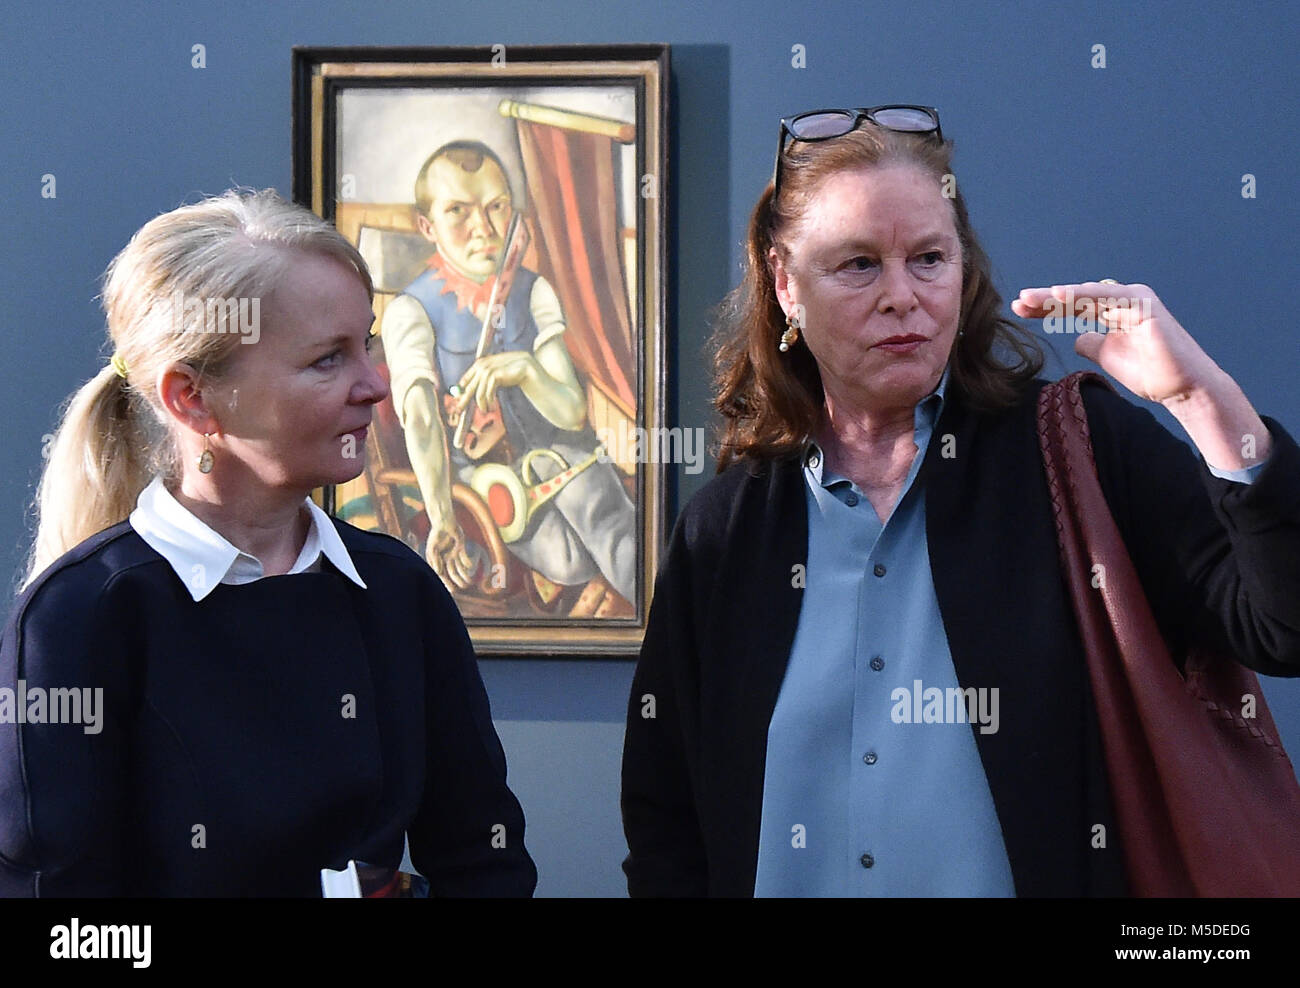 22 February 2018, Germany, Potsdam: Mayen Beckmann (R), grandchild of the painter Max Beckmann, stands next to museum director Ortrud Westheider in front of a self-portrait of her grandfather at the Museum Barberini. From Saturday onwards (24 February 2018) the museum will show a retrospective of Max Beckmann's work with the title 'Welttheater' (lit. world theatre) with more than hundred loan exhibits from German and international museums and private collections. Photo: Bernd Settnik/dpa-Zentralbild/dpa - ACHTUNG: Nur zur redaktionellen Verwendung im Zusammenhang mit einer Berichterstattung üb Stock Photo